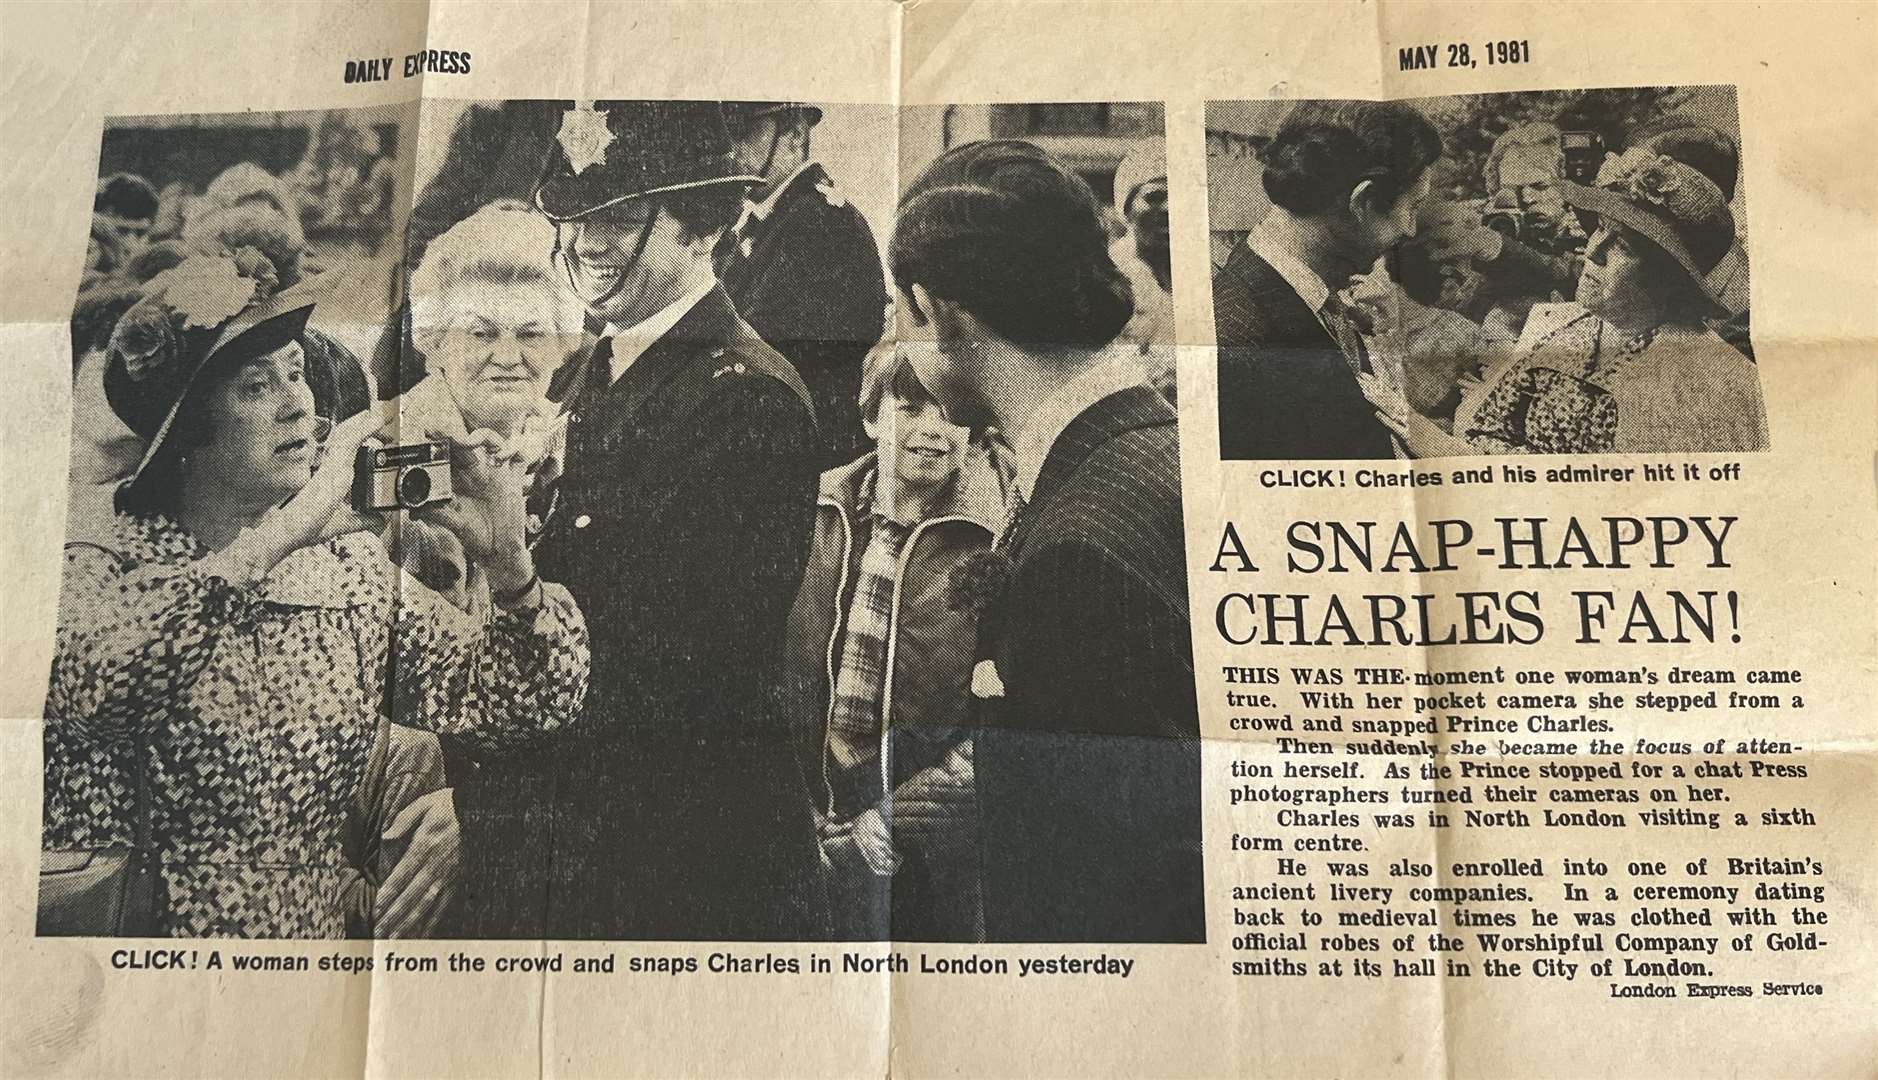 Kathy Martin in the Daily Express in 1981 after King Charles's North London visit